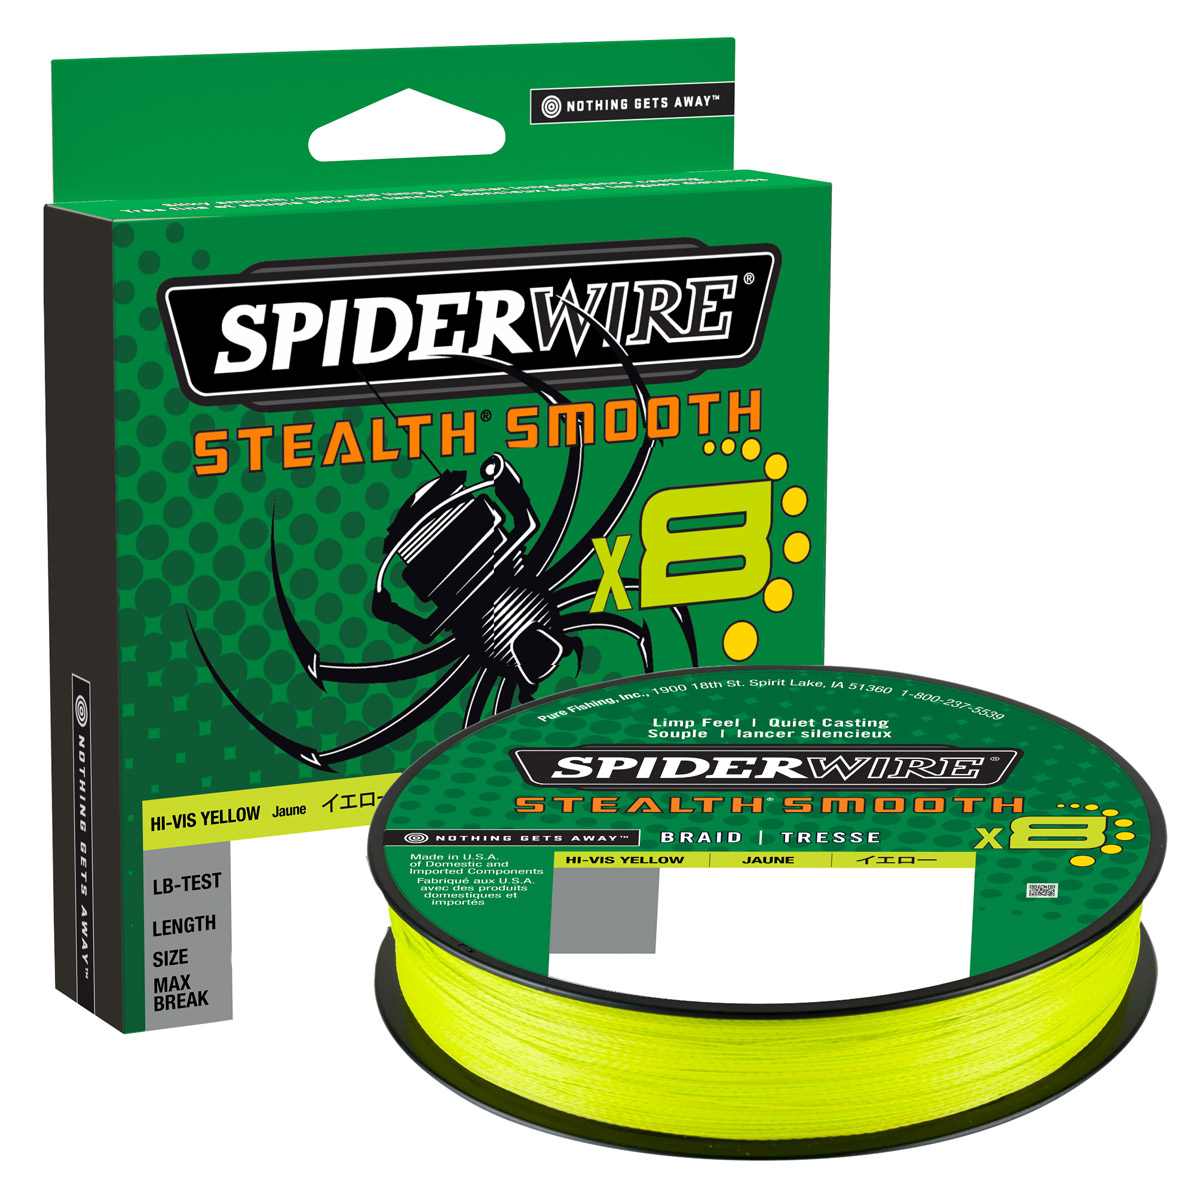 Spiderwire Stealth Smooth 8 Hi Vis Yellow 150 meter -  0.15 mm -  0.39 mm -  0.29 mm -  0.13 mm -  0.23 mm -  0.33 mm -  0,06 mm -  0.11 mm -  0.07 mm -  0.09 mm -  0.19 mm